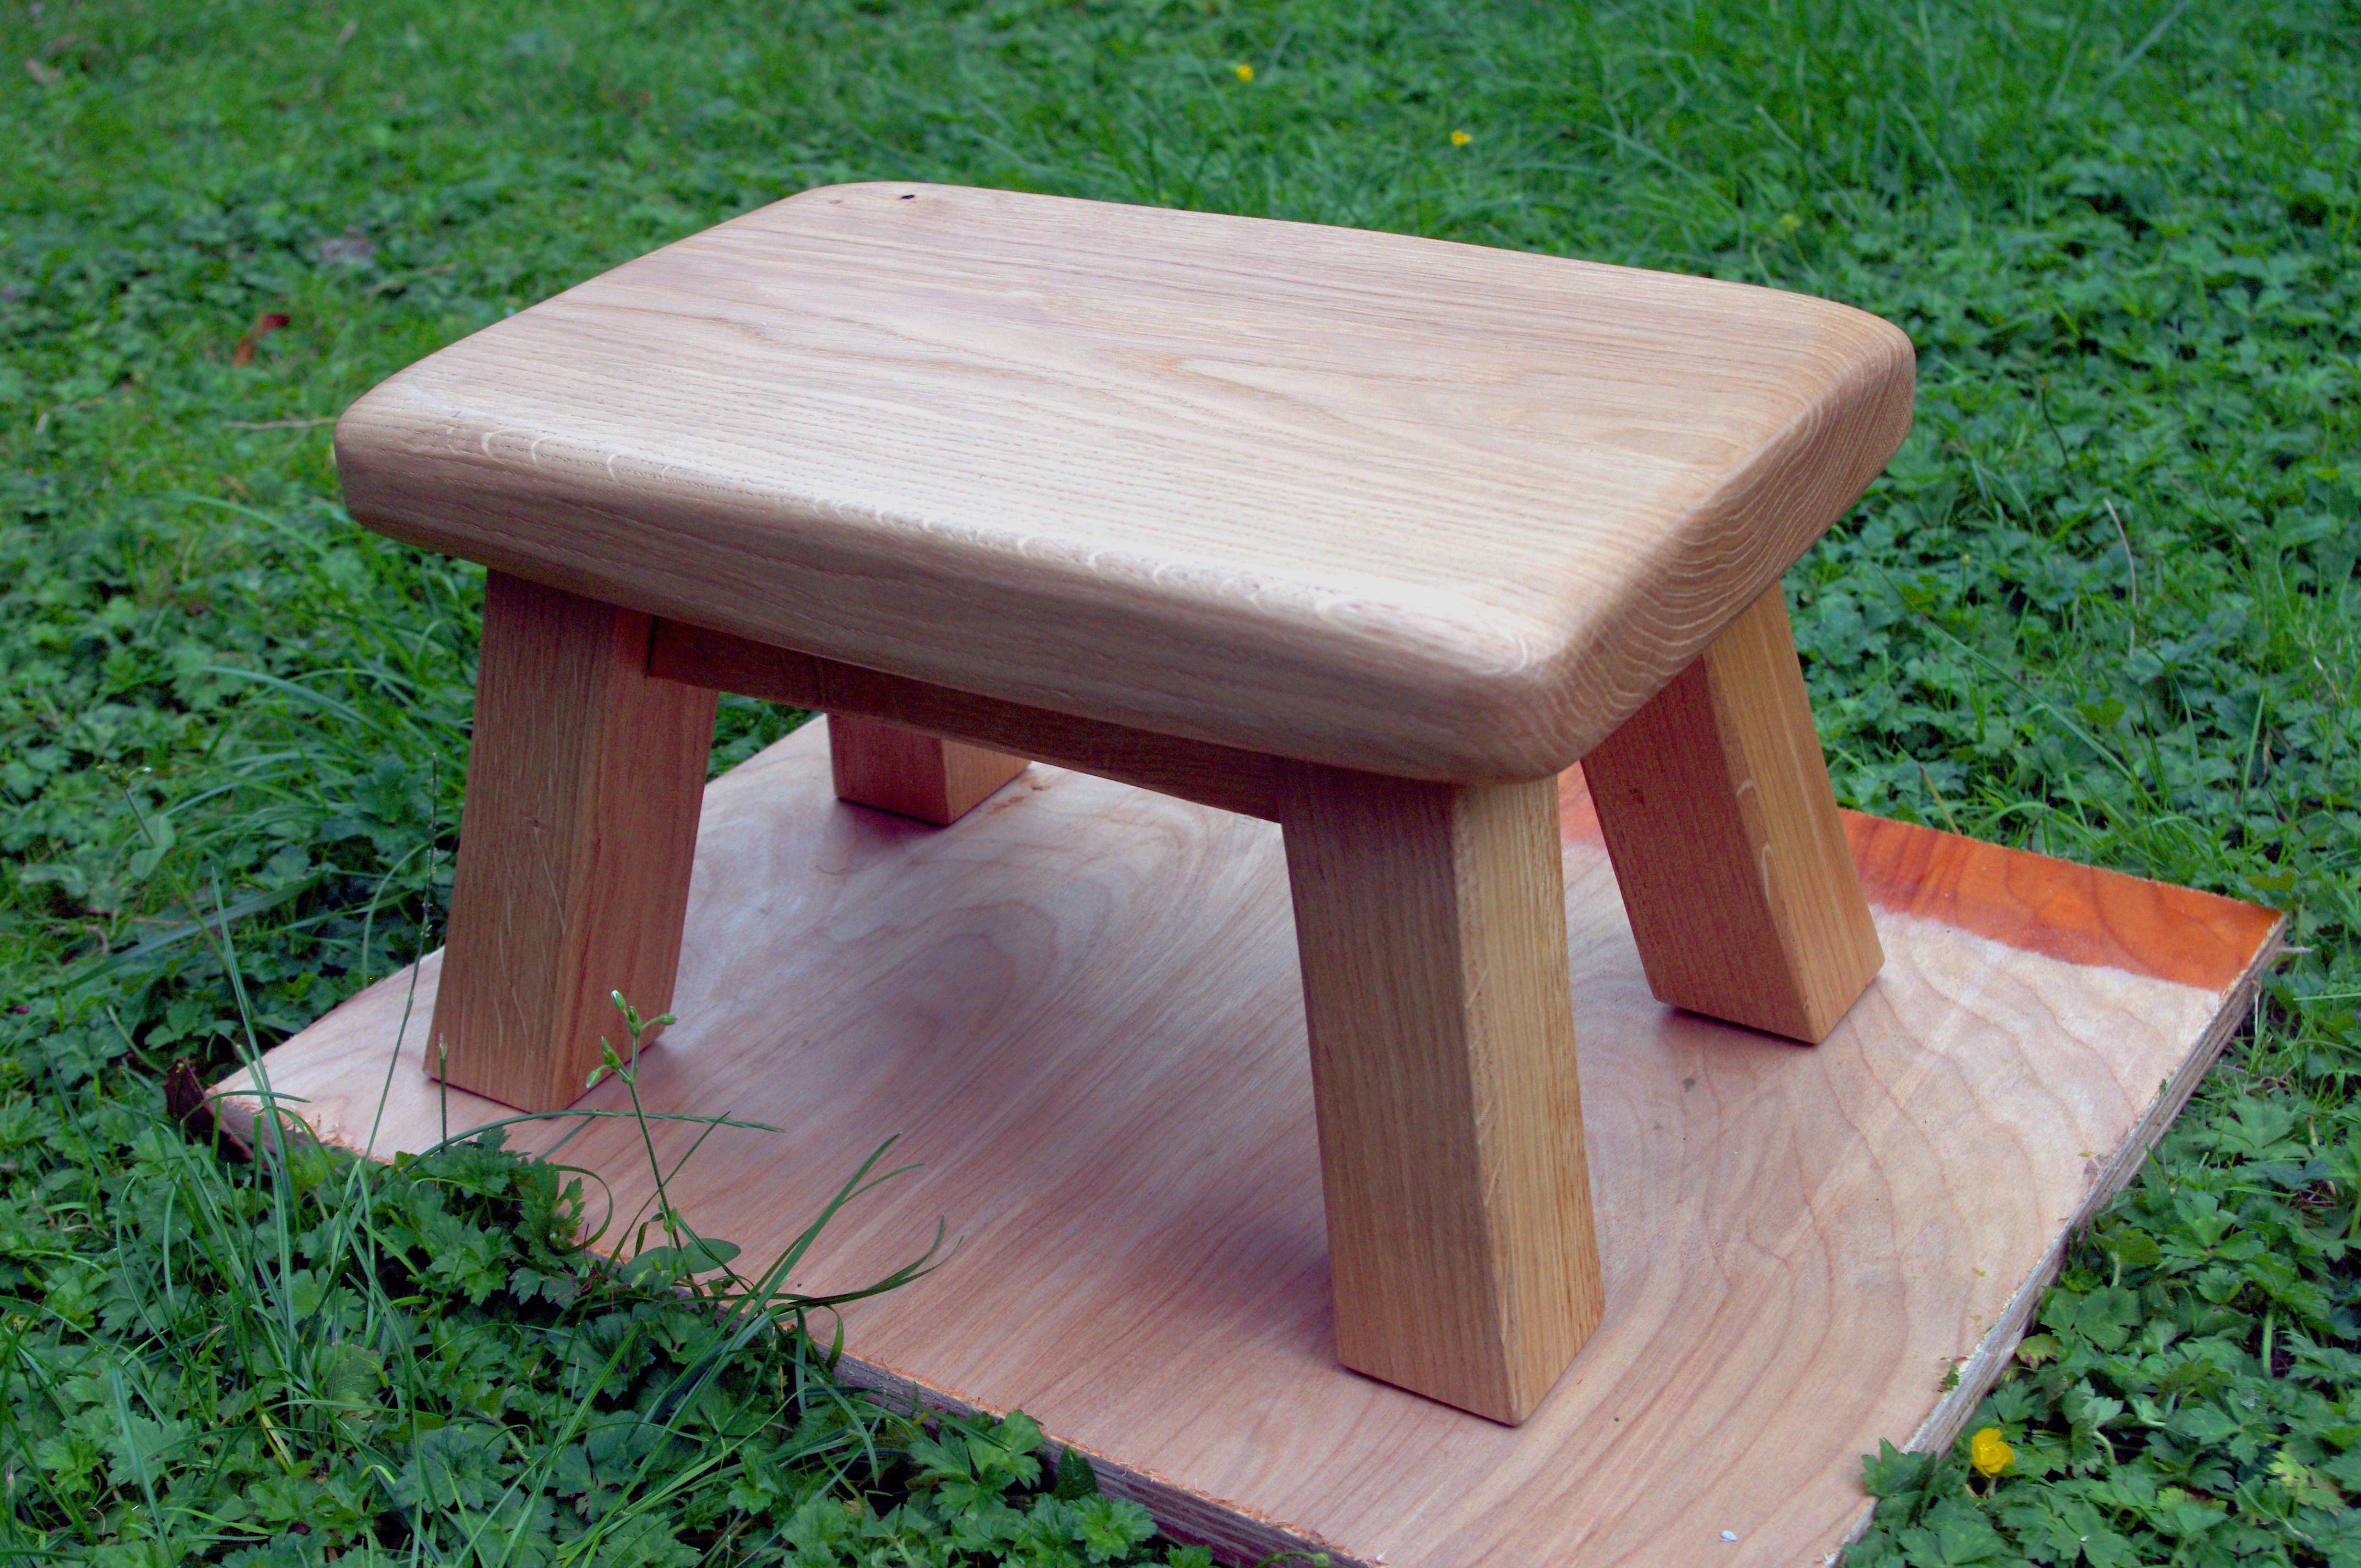 Footstool by chemical_cake